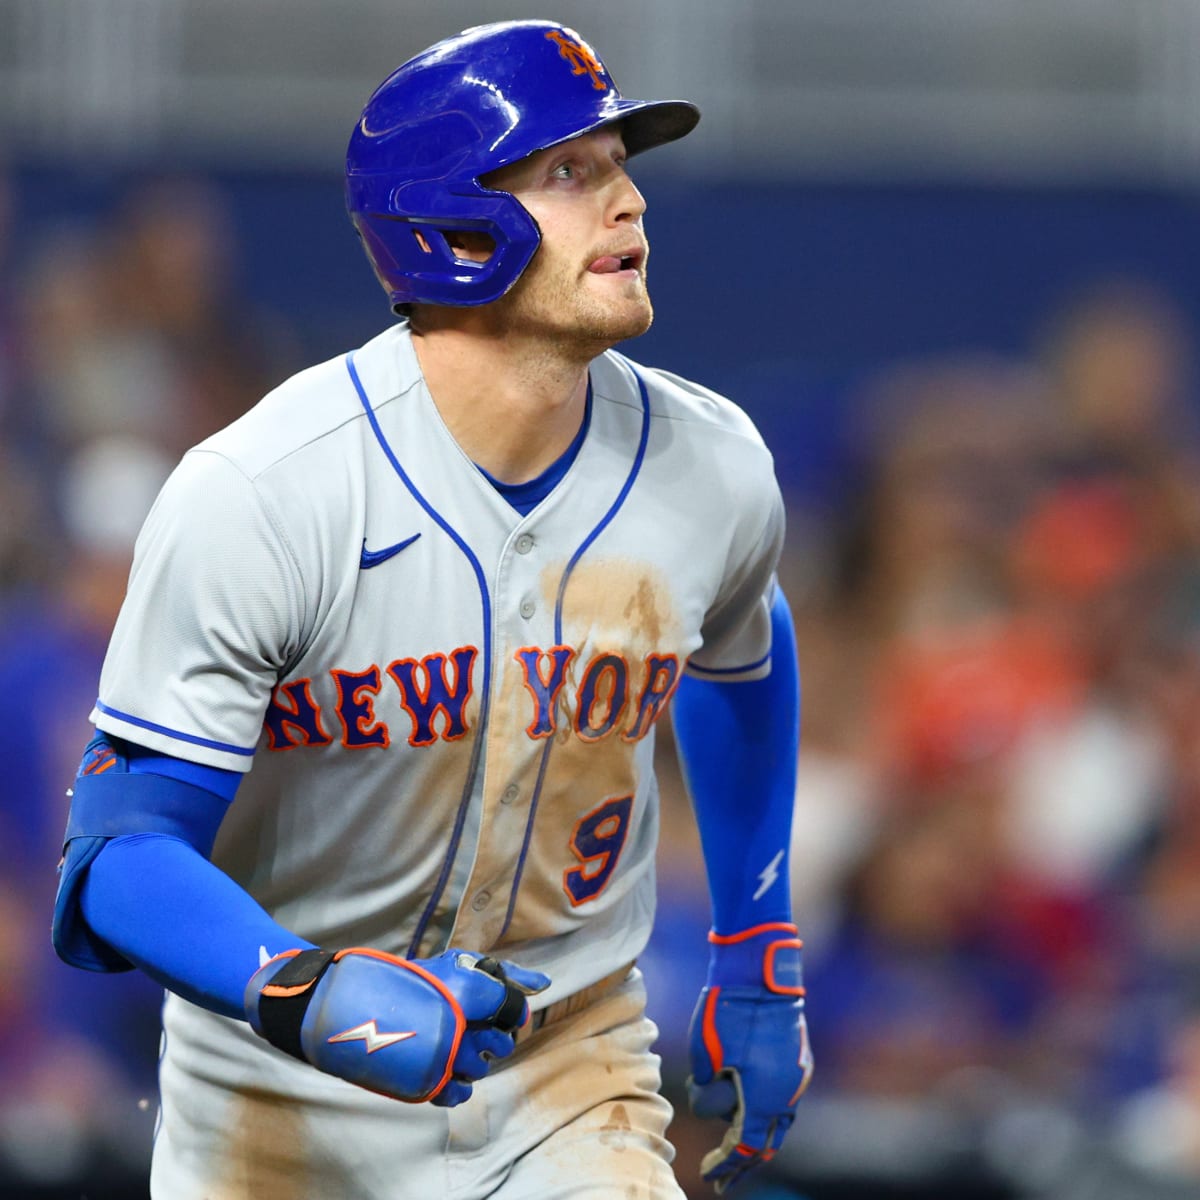 MLB rumors: Mets' Brandon Nimmo's Opening Day availability in